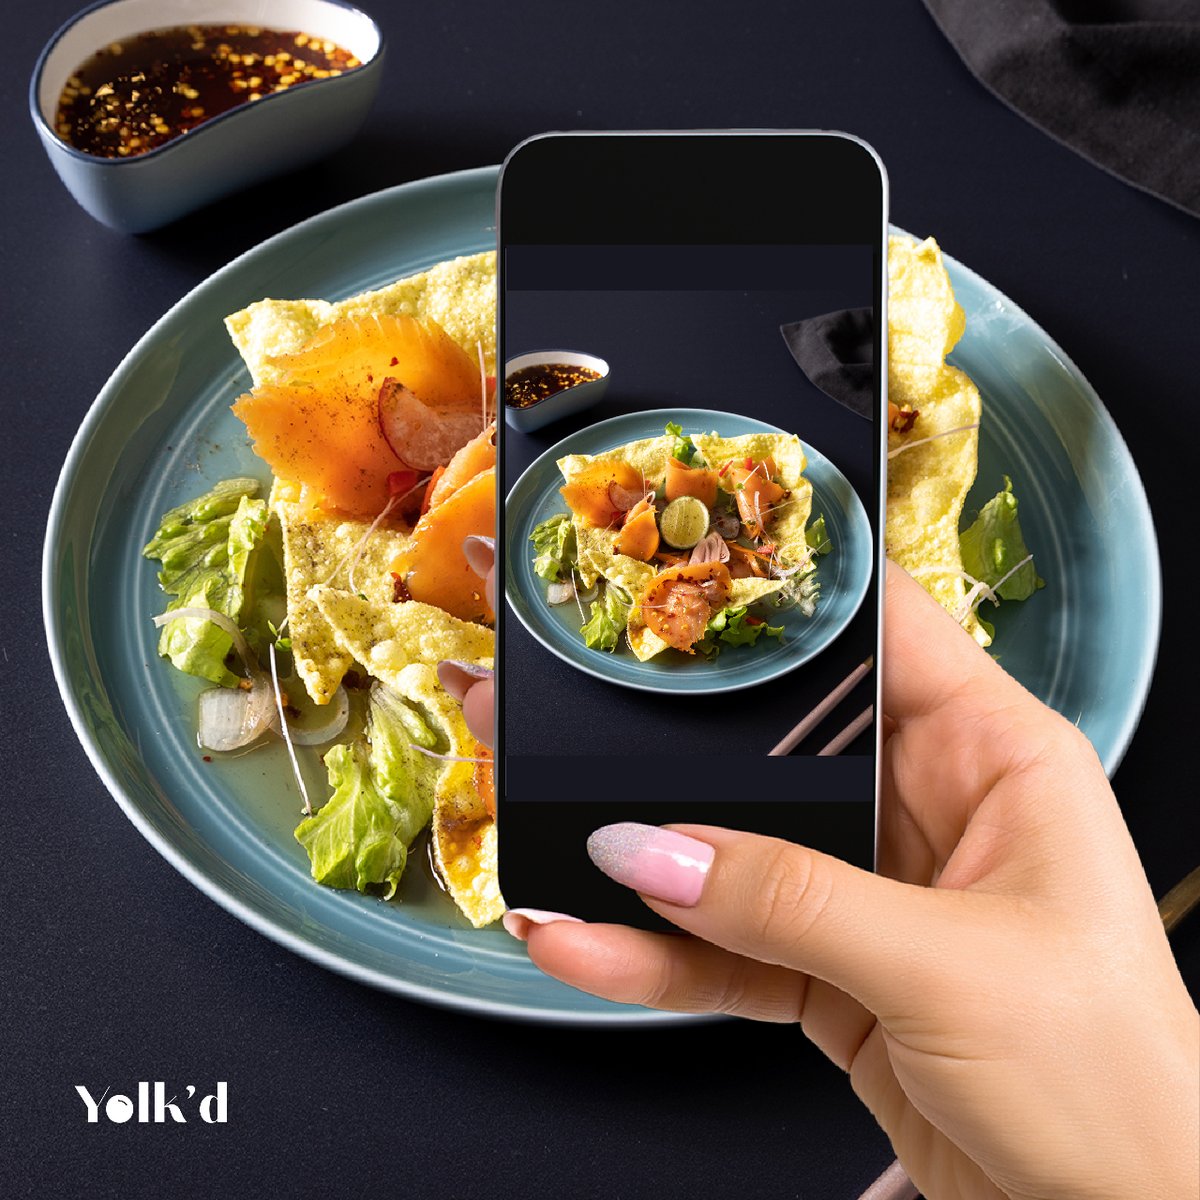 Indulge in a feast for the eyes as well as the taste buds! Our culinary creations not only satisfy your palate but also captivate with their visual allure. Experience the artistry on your plate at Yolk'D.

#yolkdartistry #visualdelights #foodieart #edibleart #foodartistry